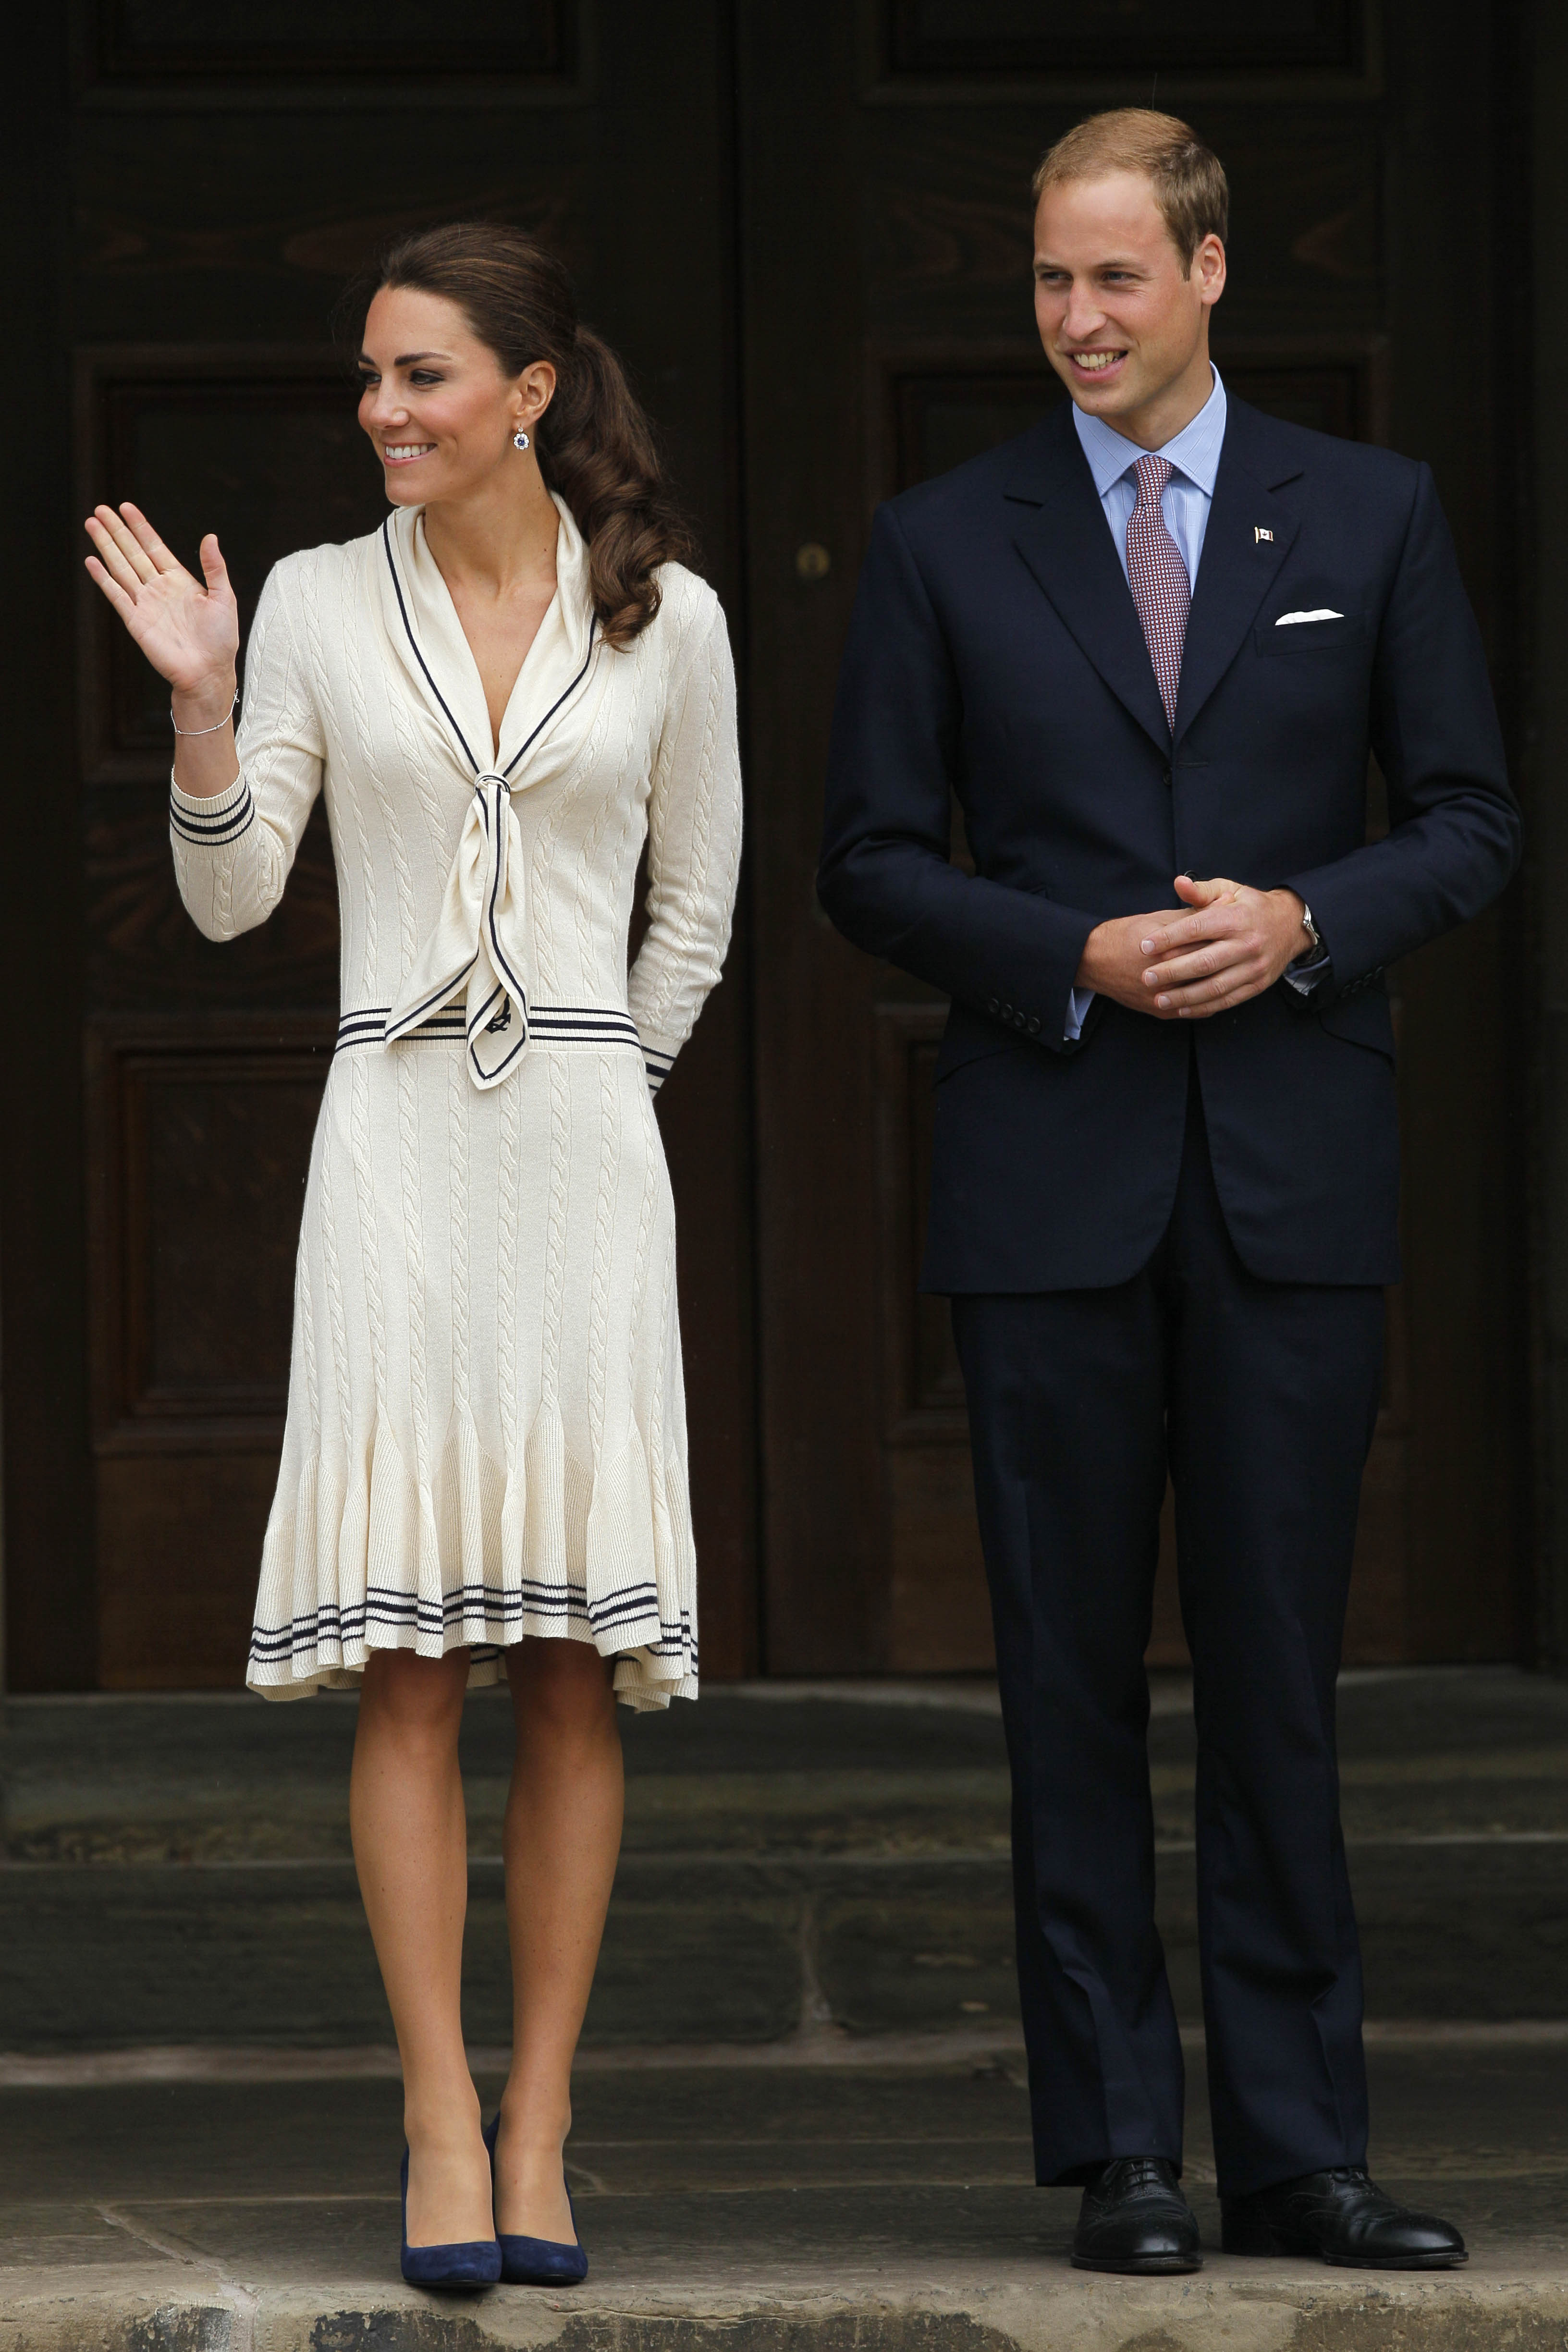 McQueen for a Queen
                              Middleton wore a white dress by Alexander McQueen for an arrival ceremony in Charlottetown on July 4, 2011. The label, now designed by Sarah Burton, has emerged as one of the future Queen's favorite designers.